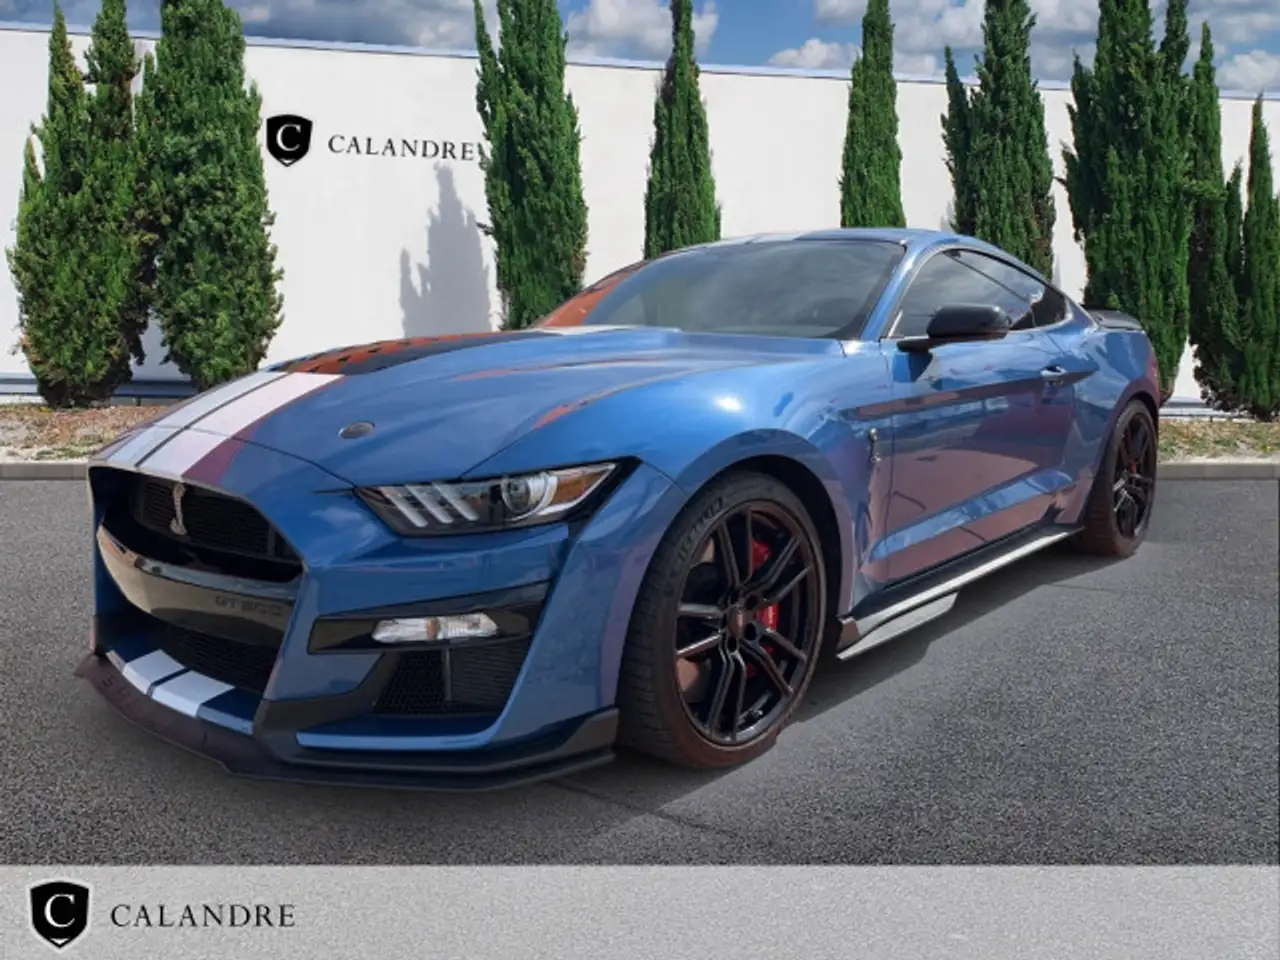 2020 - Ford Mustang Mustang Boîte automatique Coupé